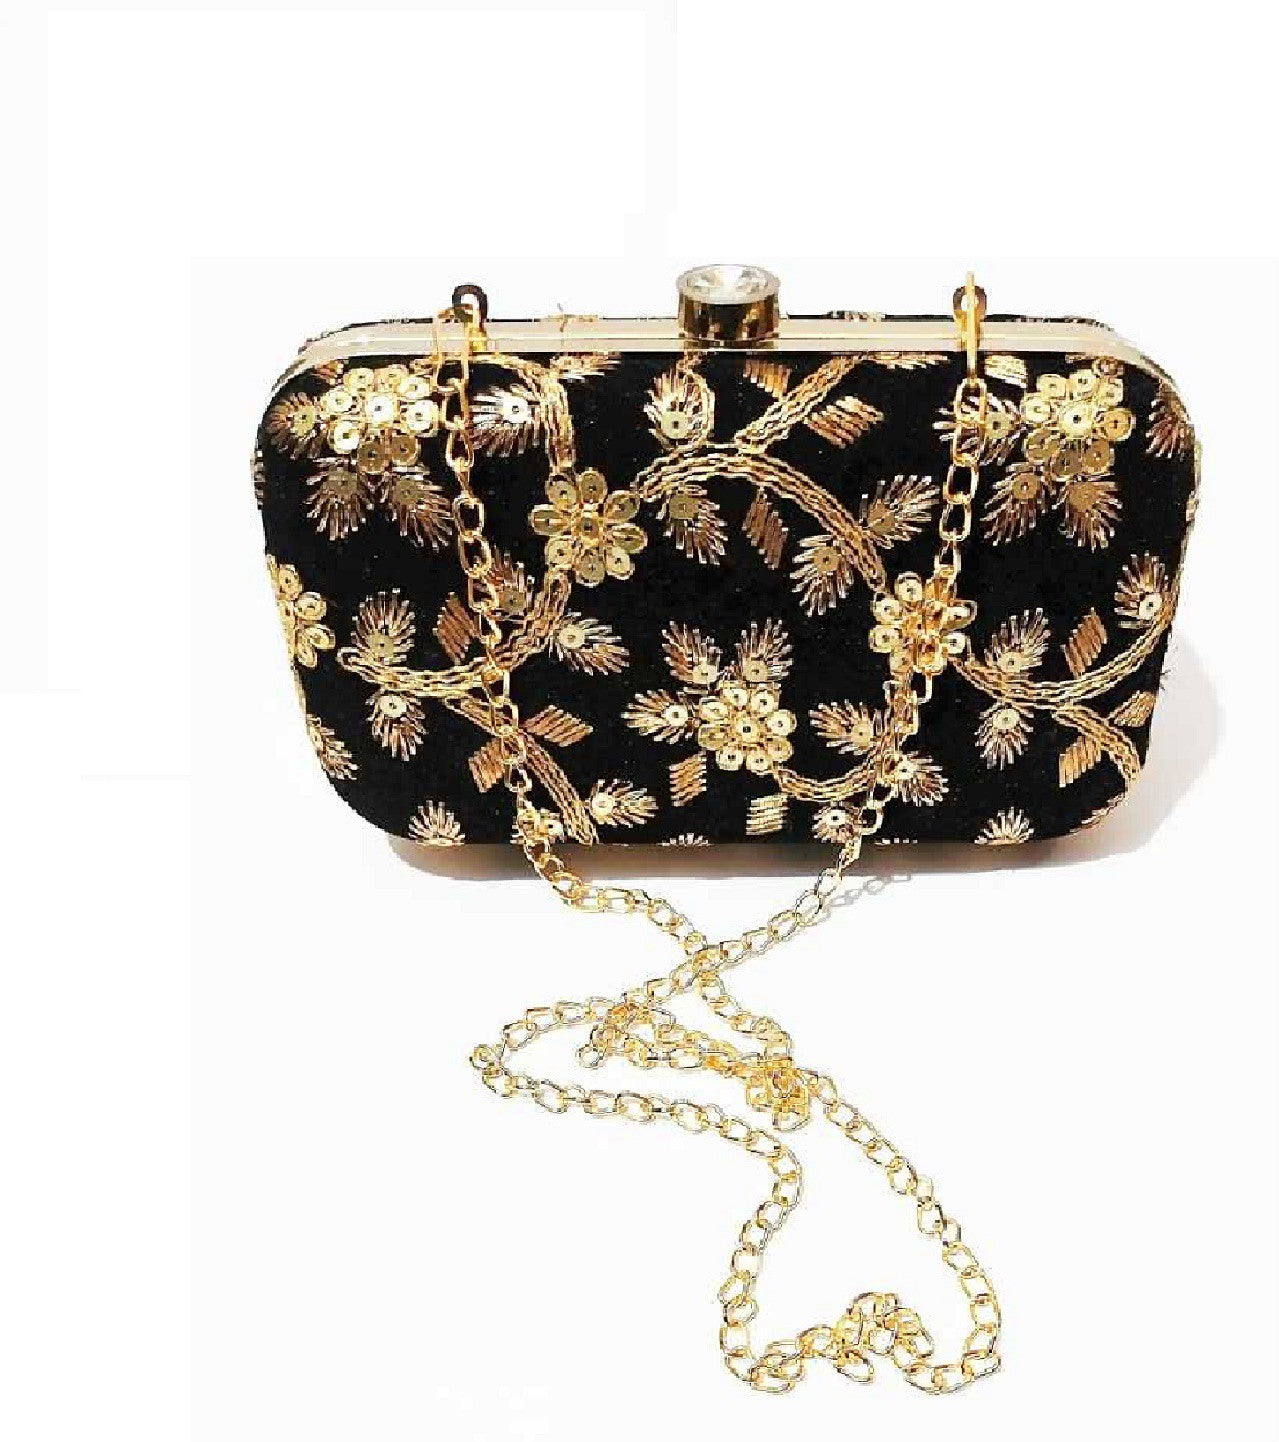 Women's Silk Embroidered Evening Party Hand Clutch Party/Sling bag/Wedding  Purse | eBay